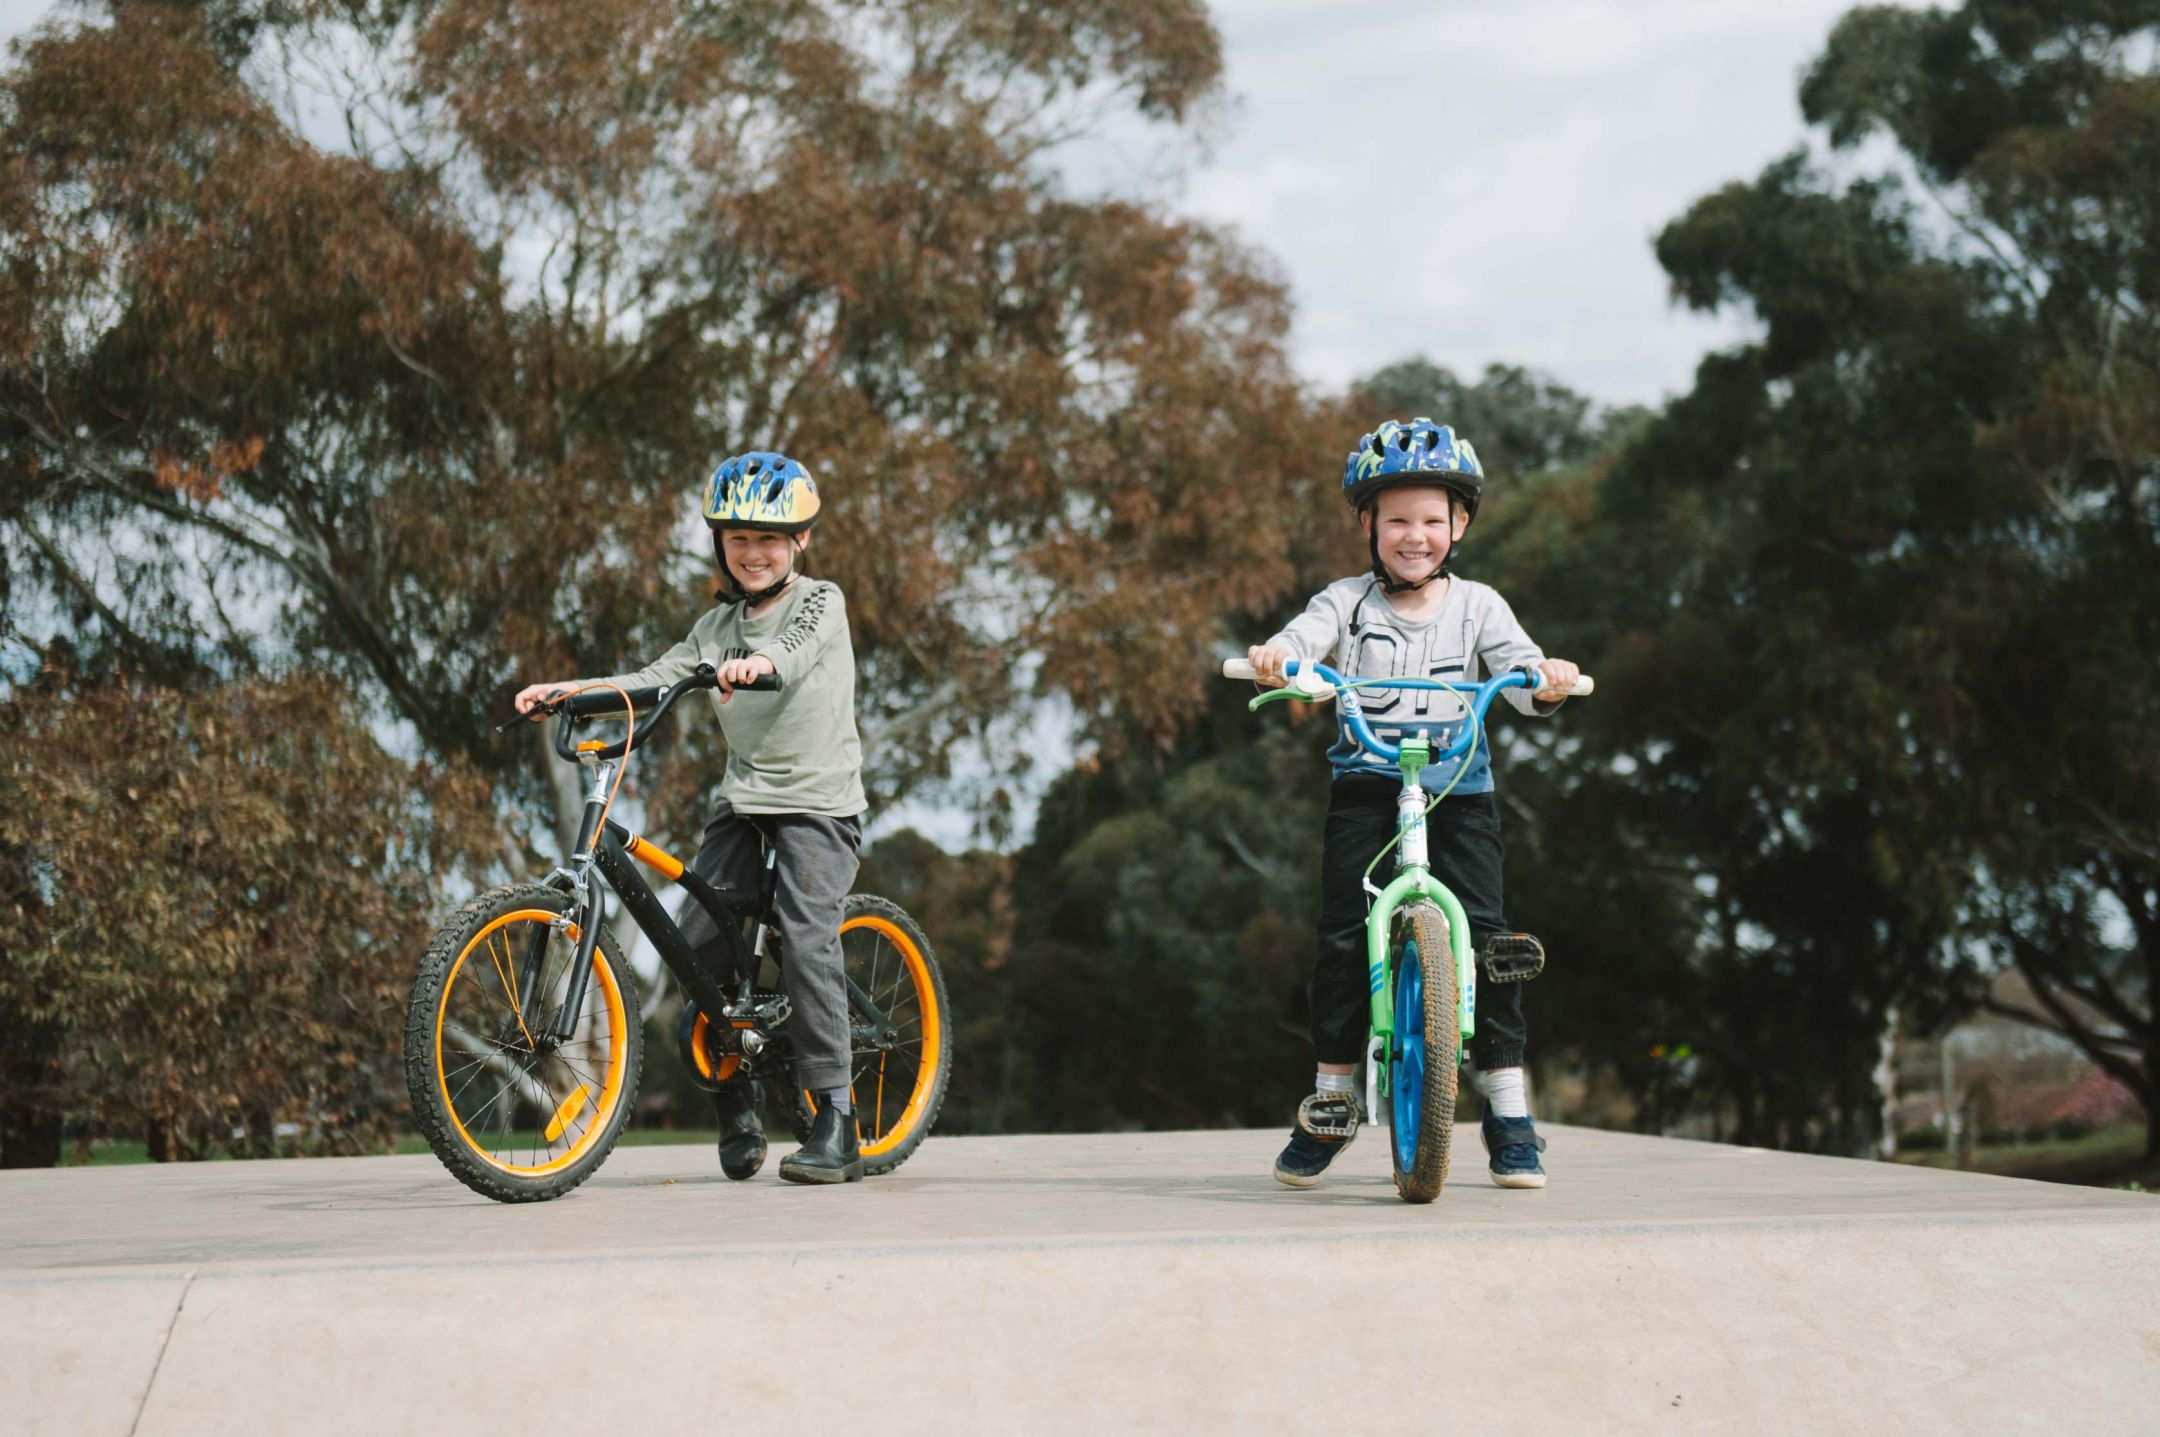 Two young boys wearing helmets and riding bicycles